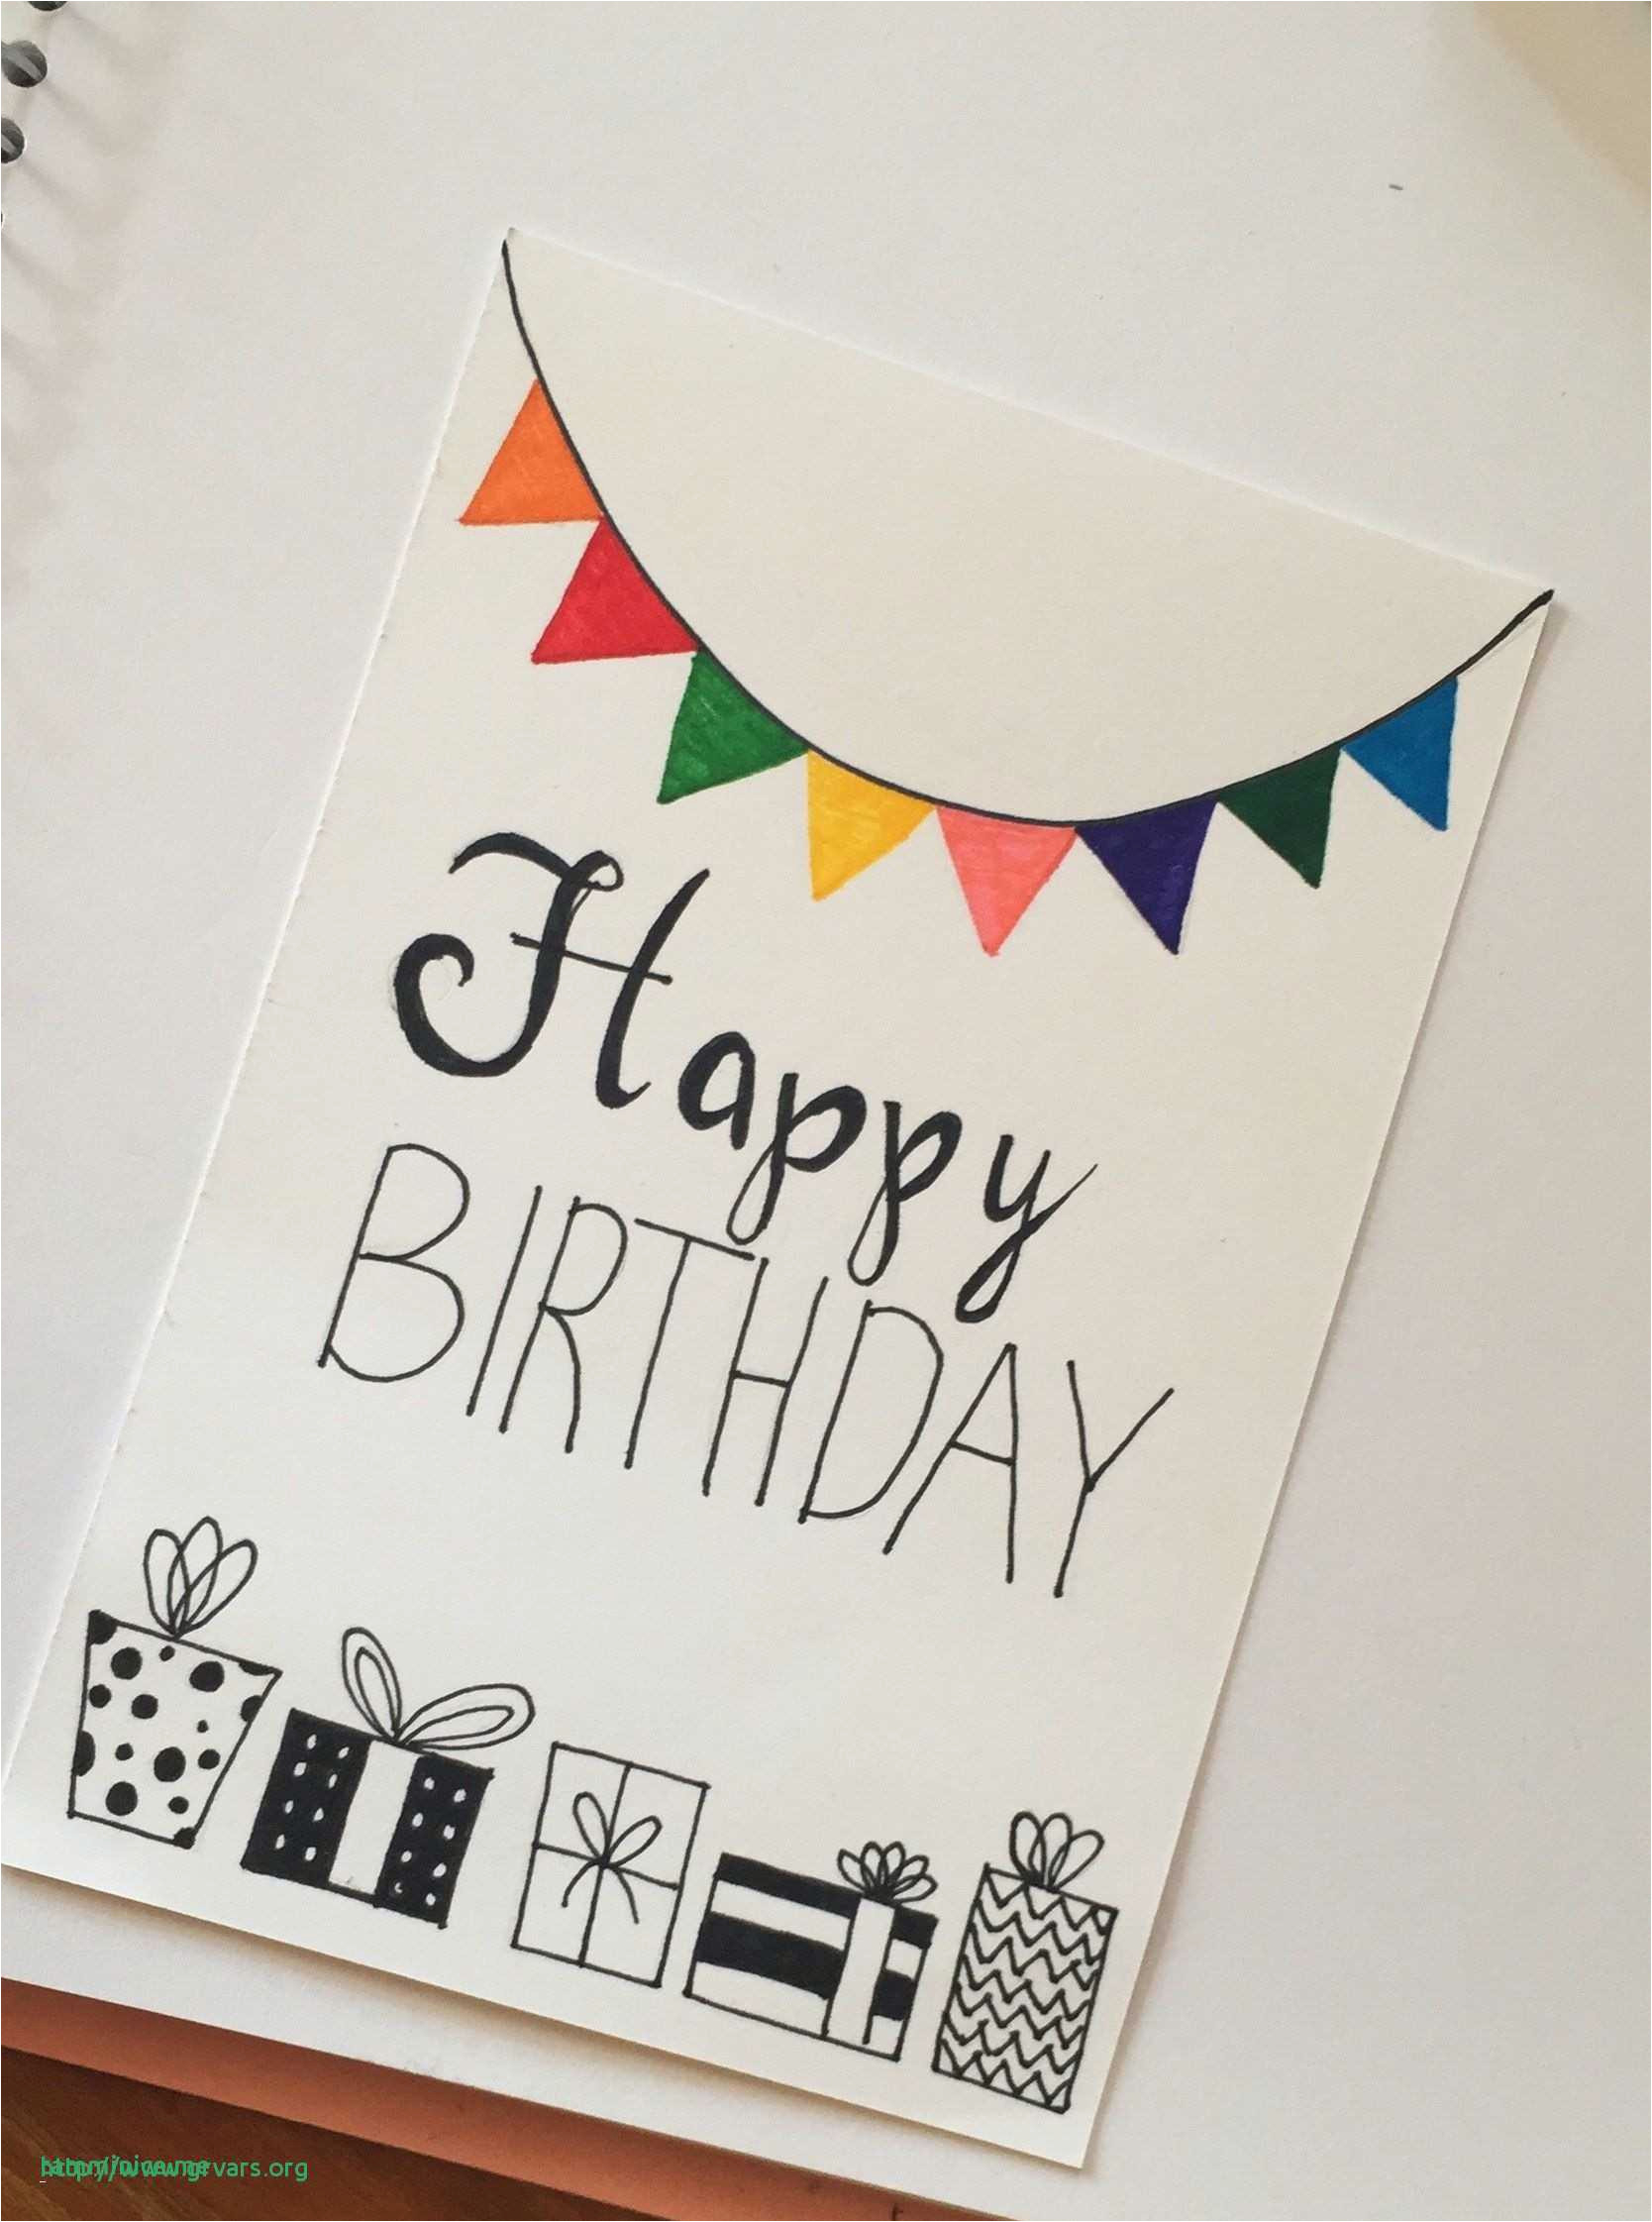 Birthday Card Ideas For Friend How To Make Diy Birthday Cards For Best Friend Simple Handmade